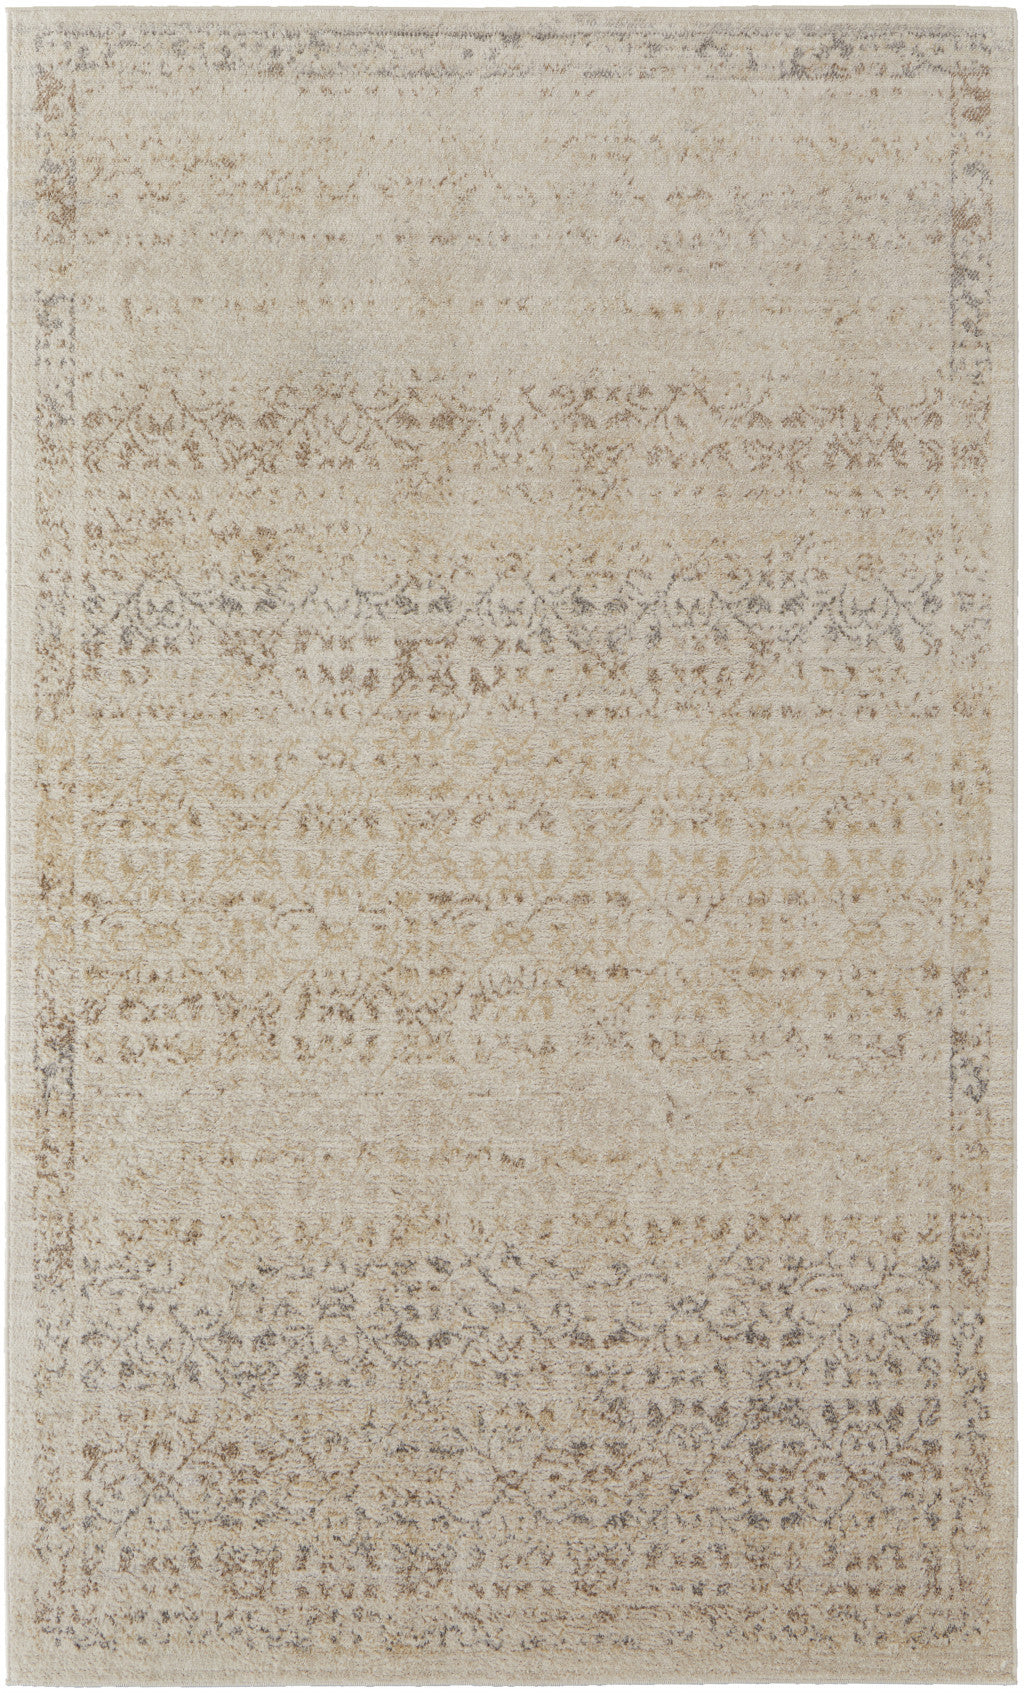 4' X 6' Ivory Tan And Gray Abstract Power Loom Distressed Area Rug